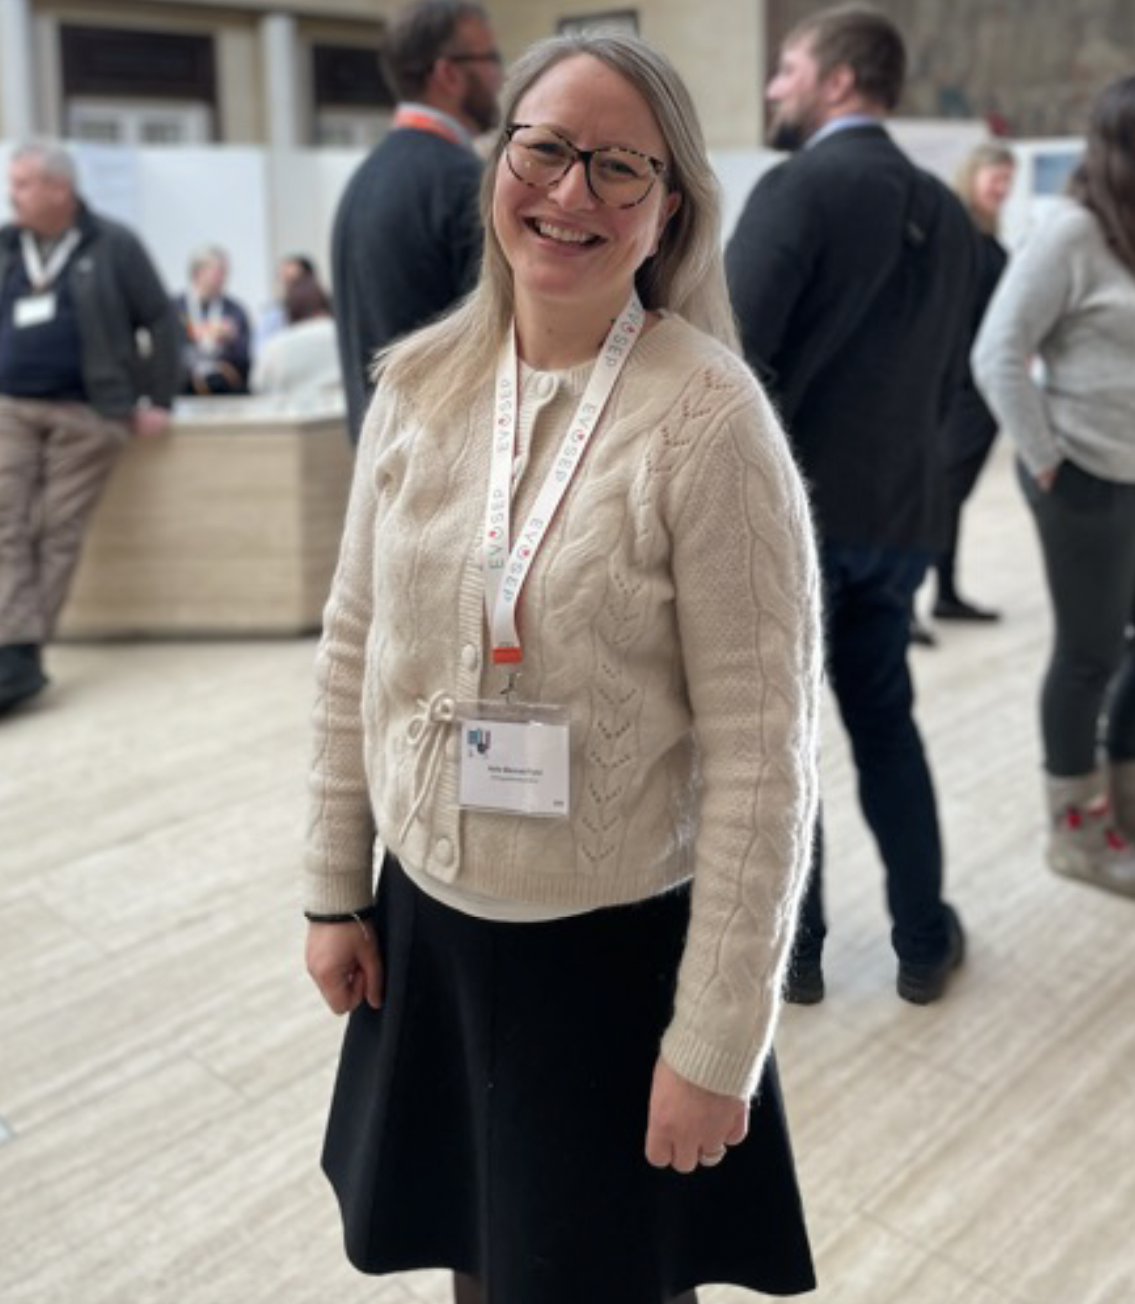 A relieved and happy Helle Malerød-Fjeld (chair of the Sandefjord symposium) after the closing of the meeting.